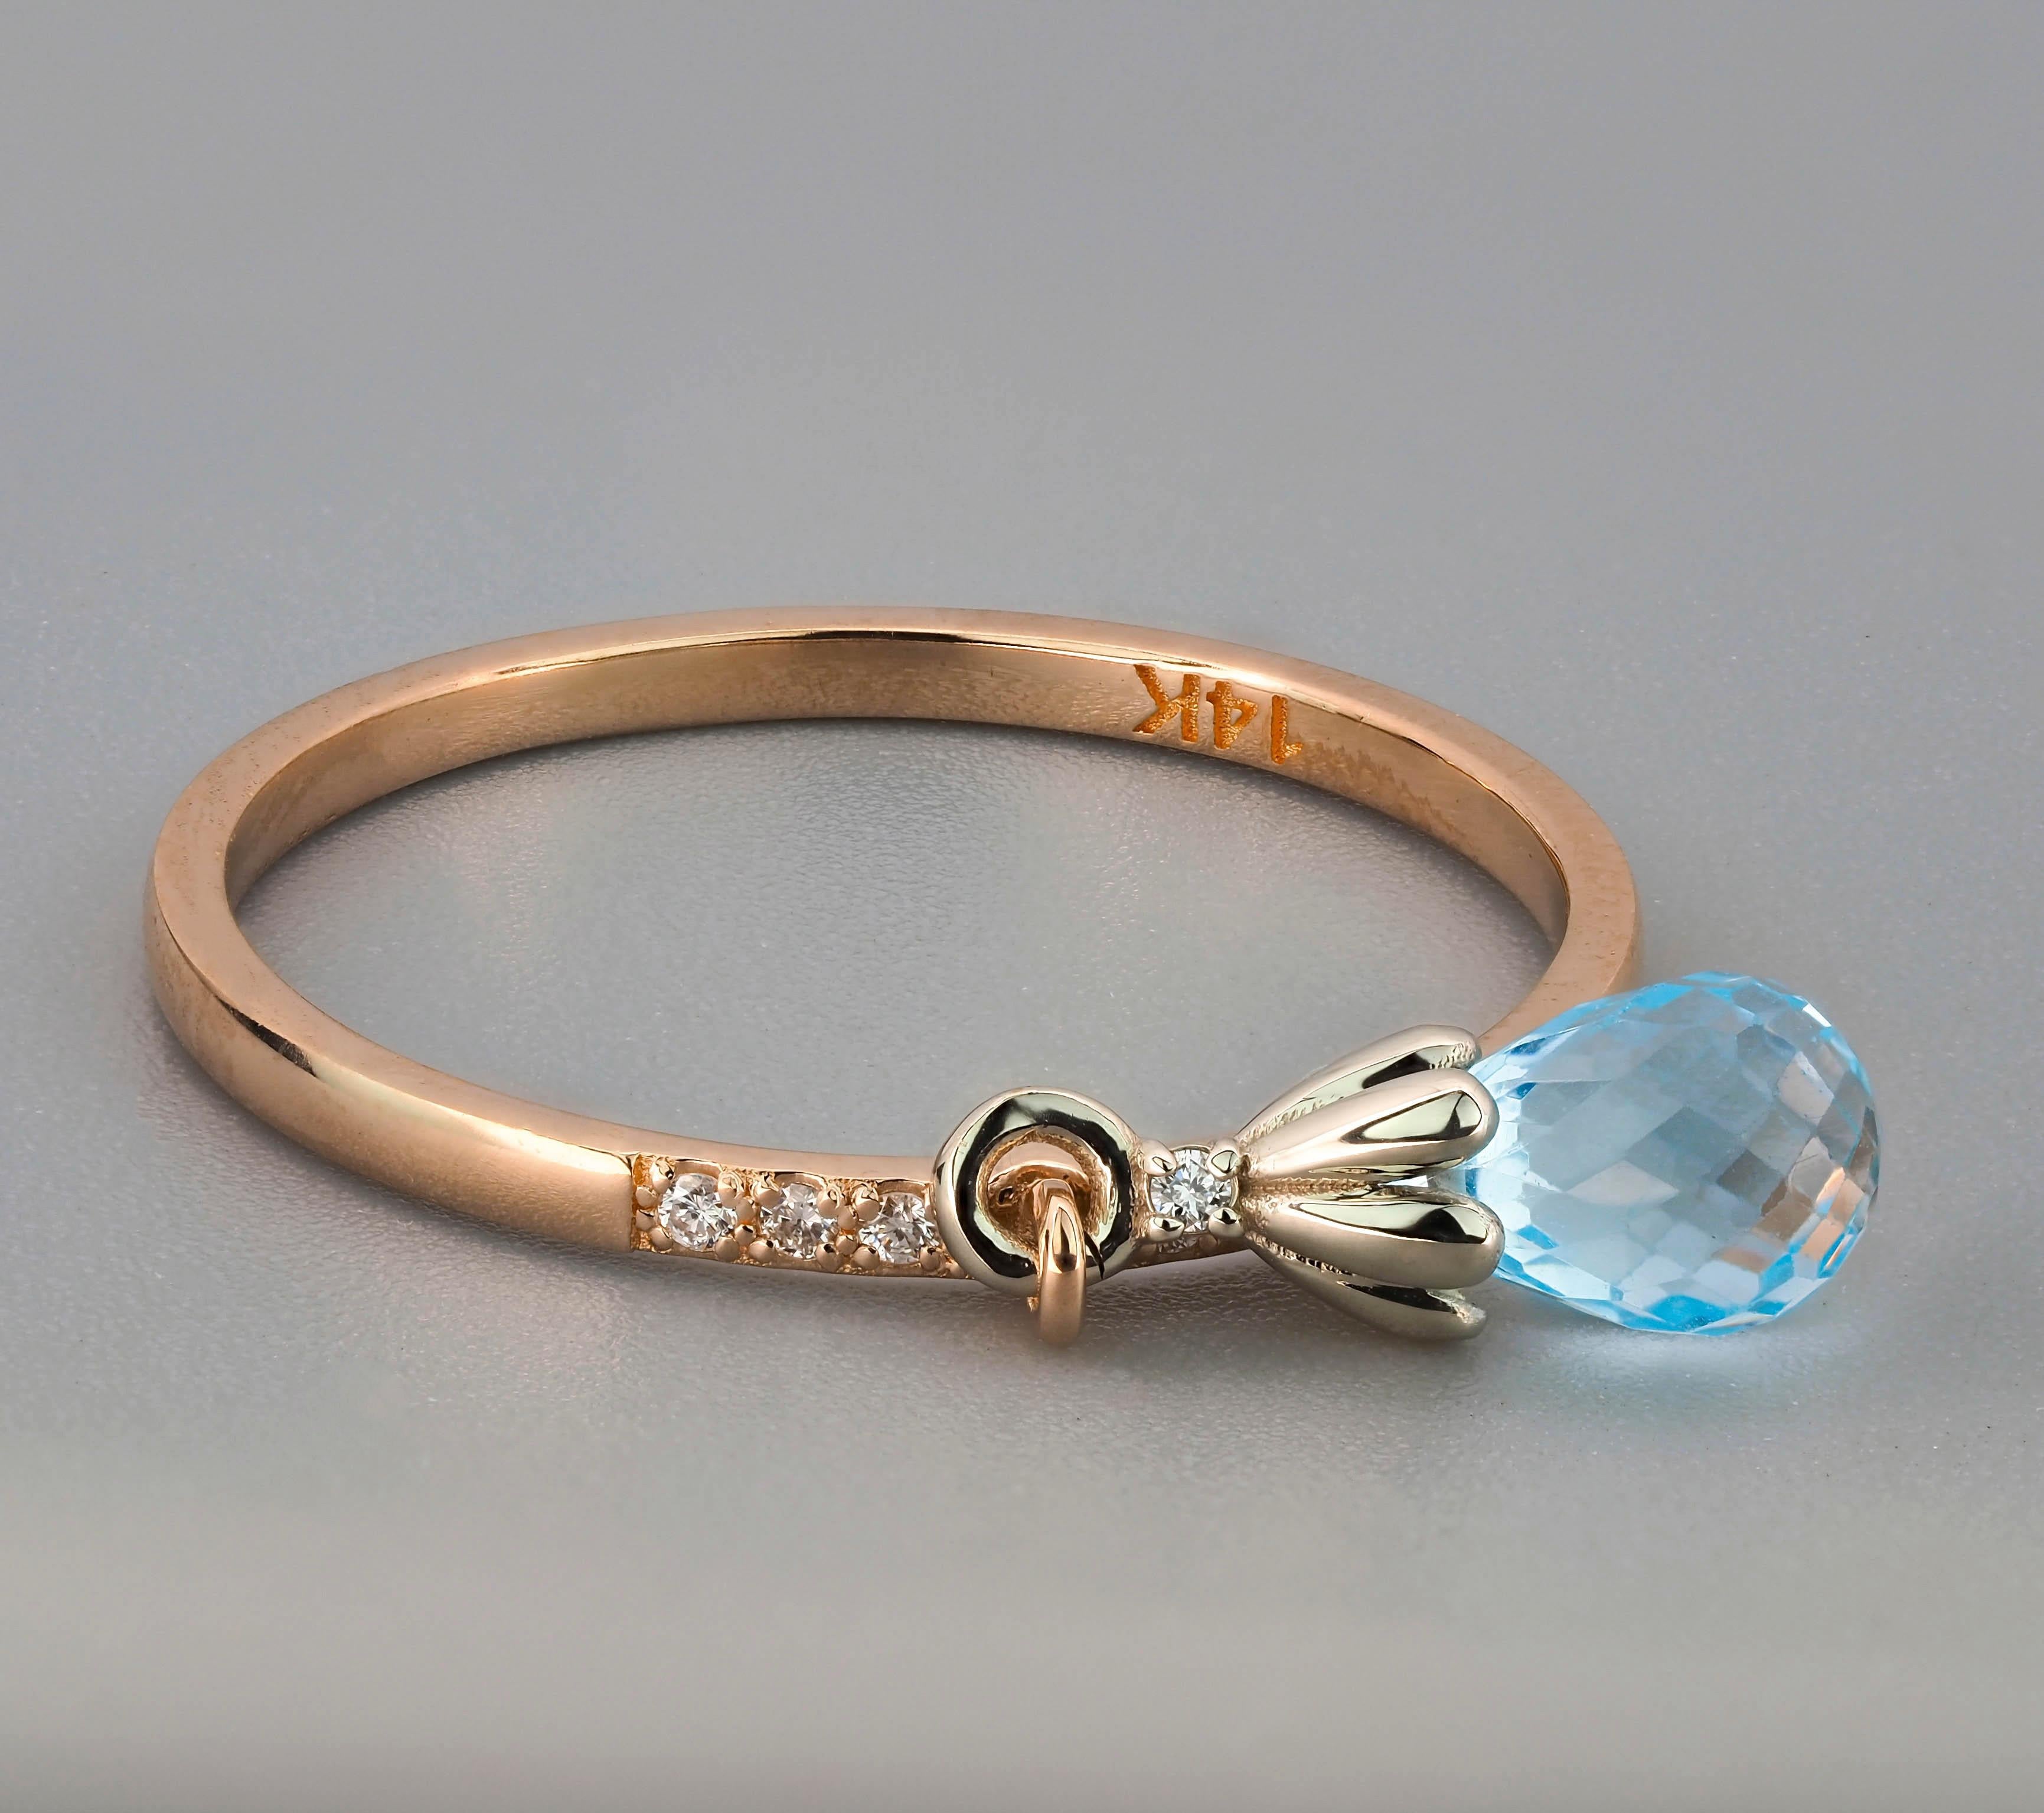 For Sale:  14k Gold Ring with Topaz Briolette and Diamonds 9